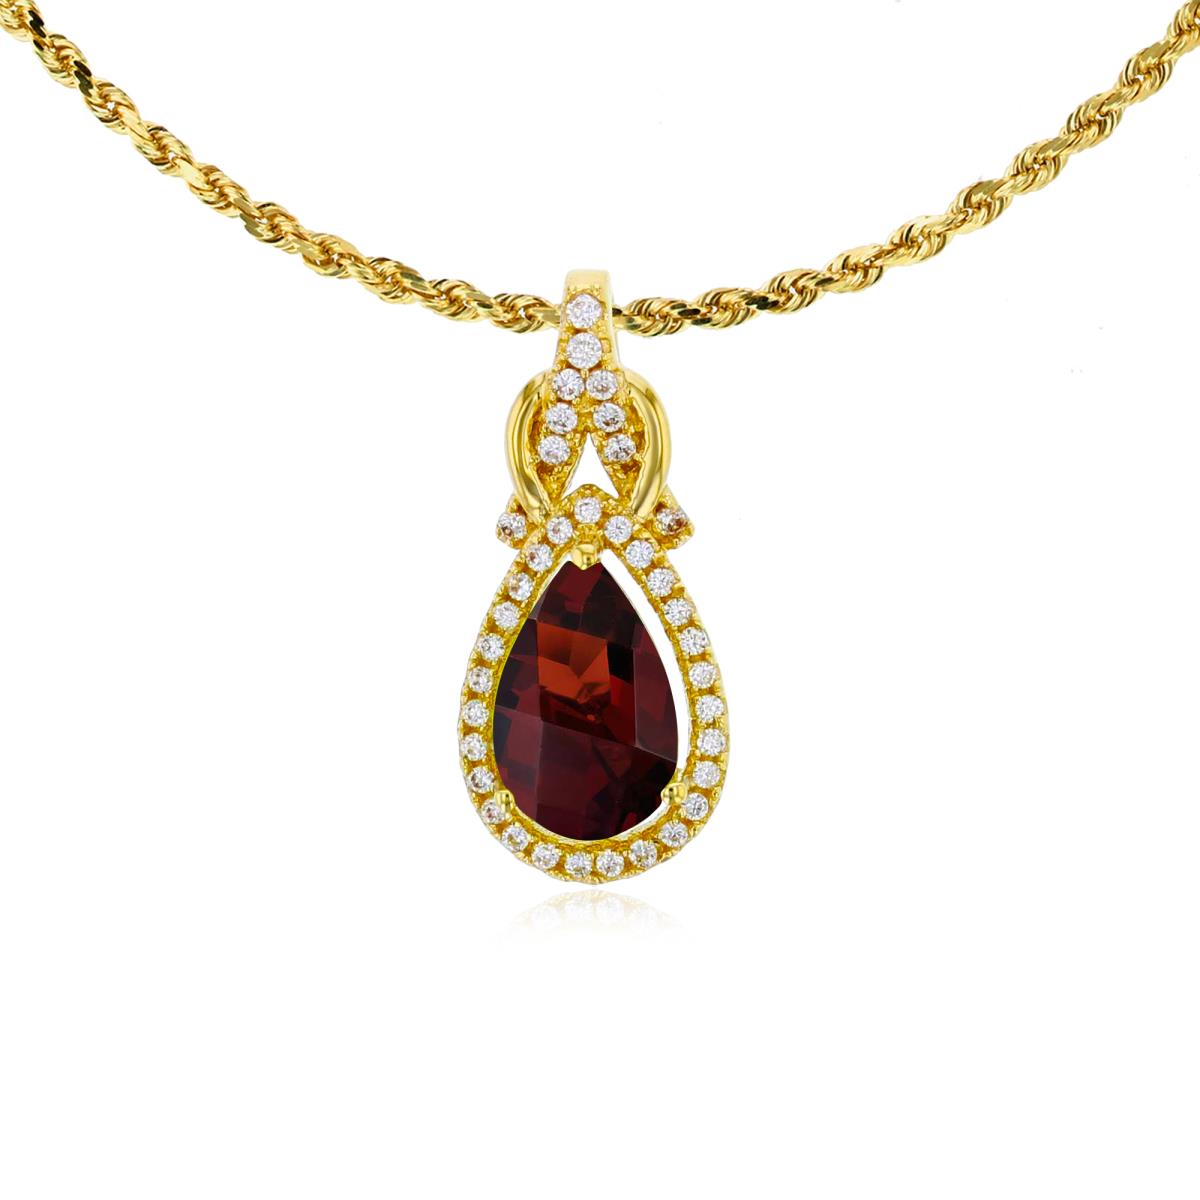 14K Yellow Gold 8x5mm Pear Cut Garnet & 0.11 CTTW Rnd Diamond Knot 18" Rope Chain Necklace